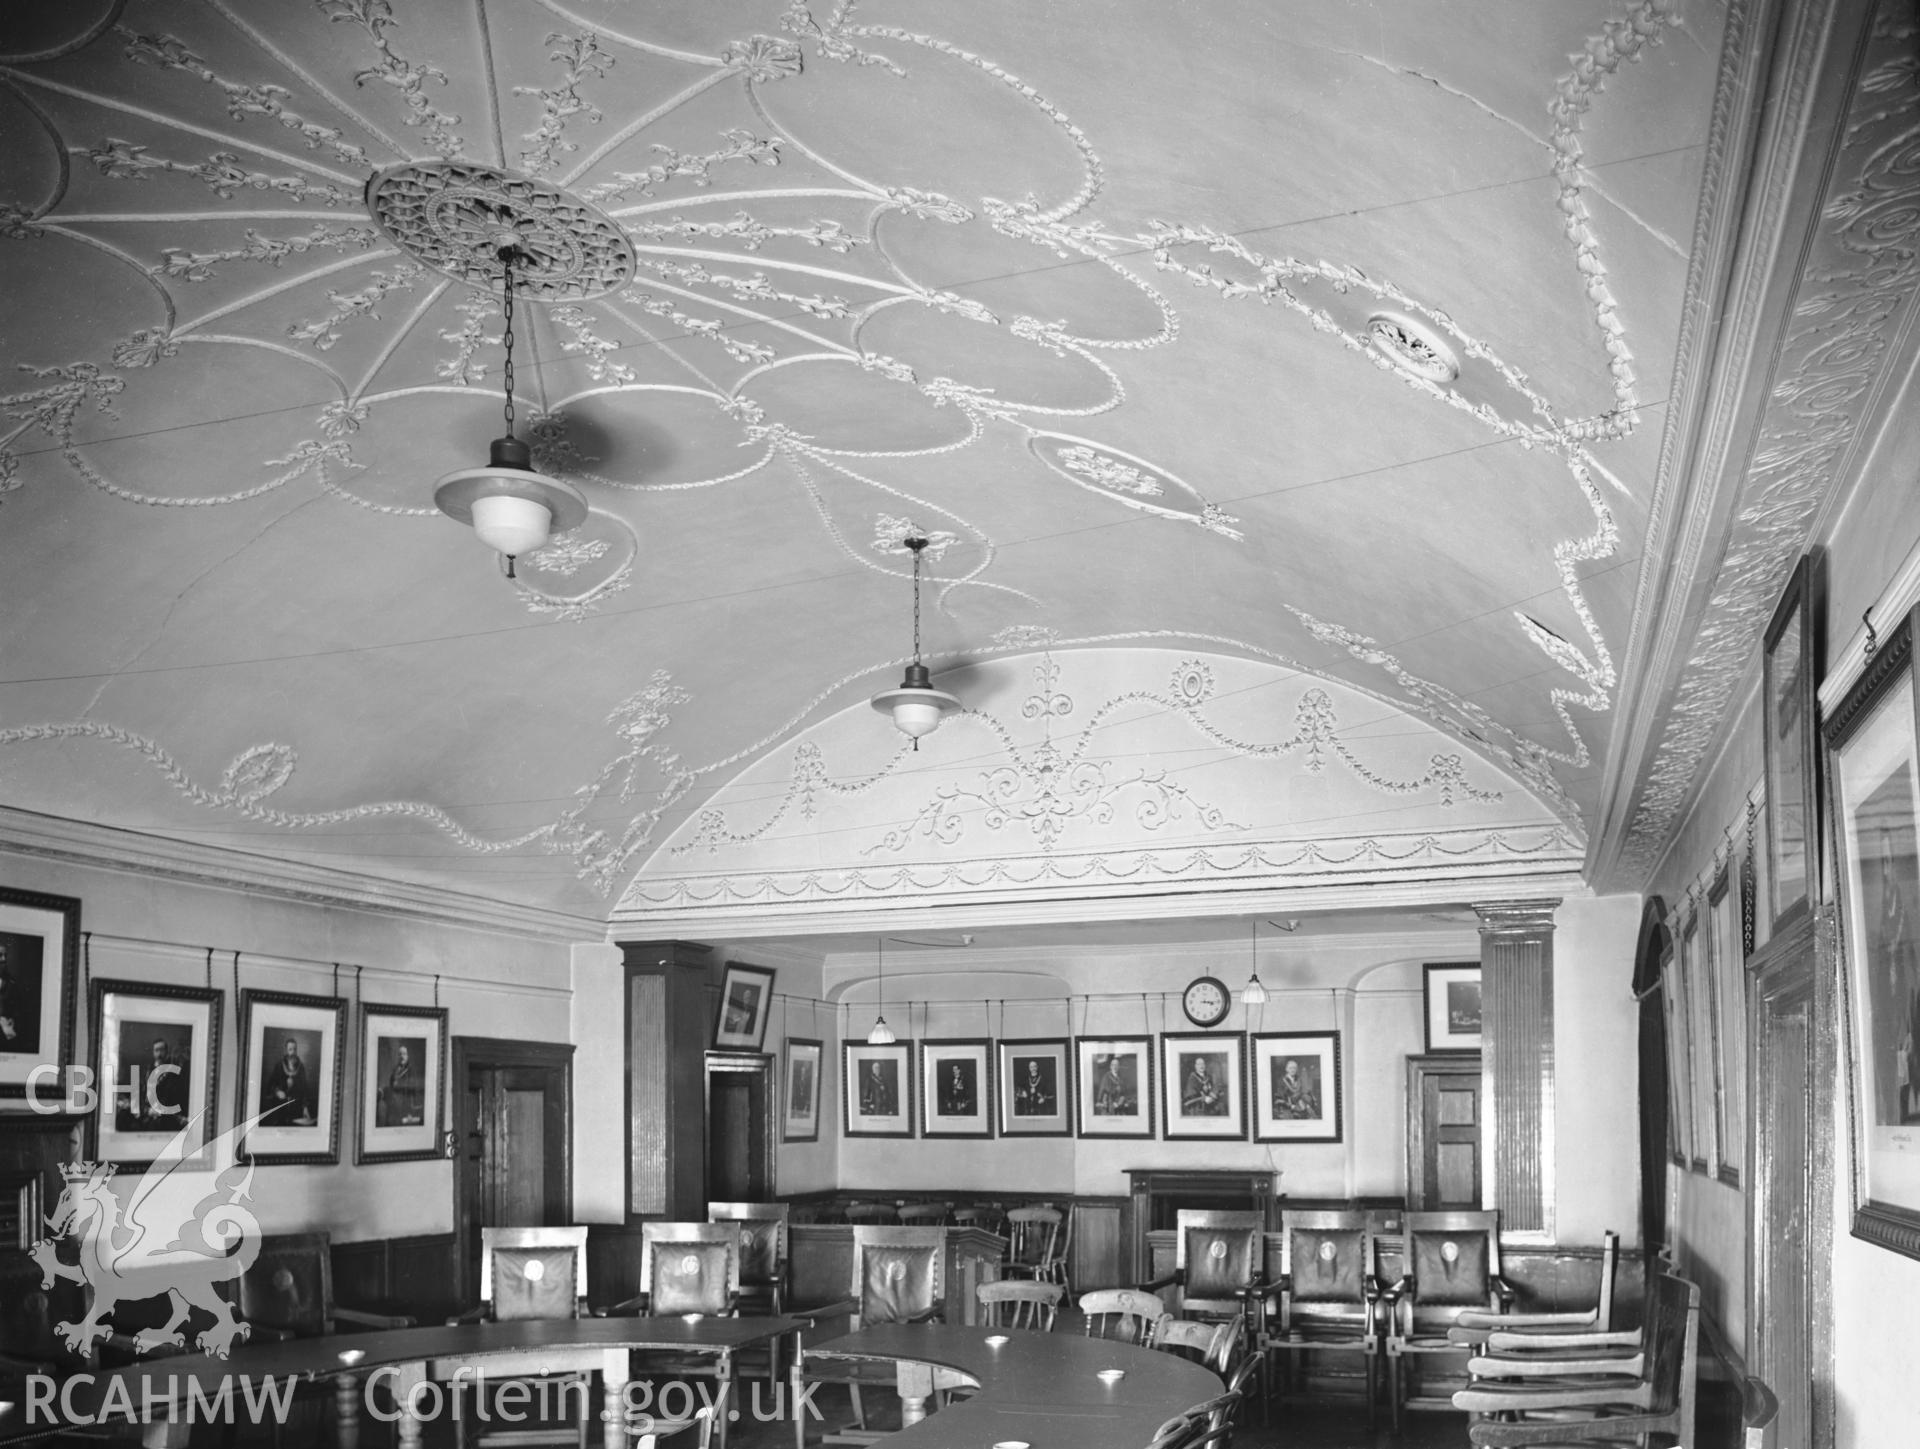 Interior view showing ceiling in Bishop's Palace.